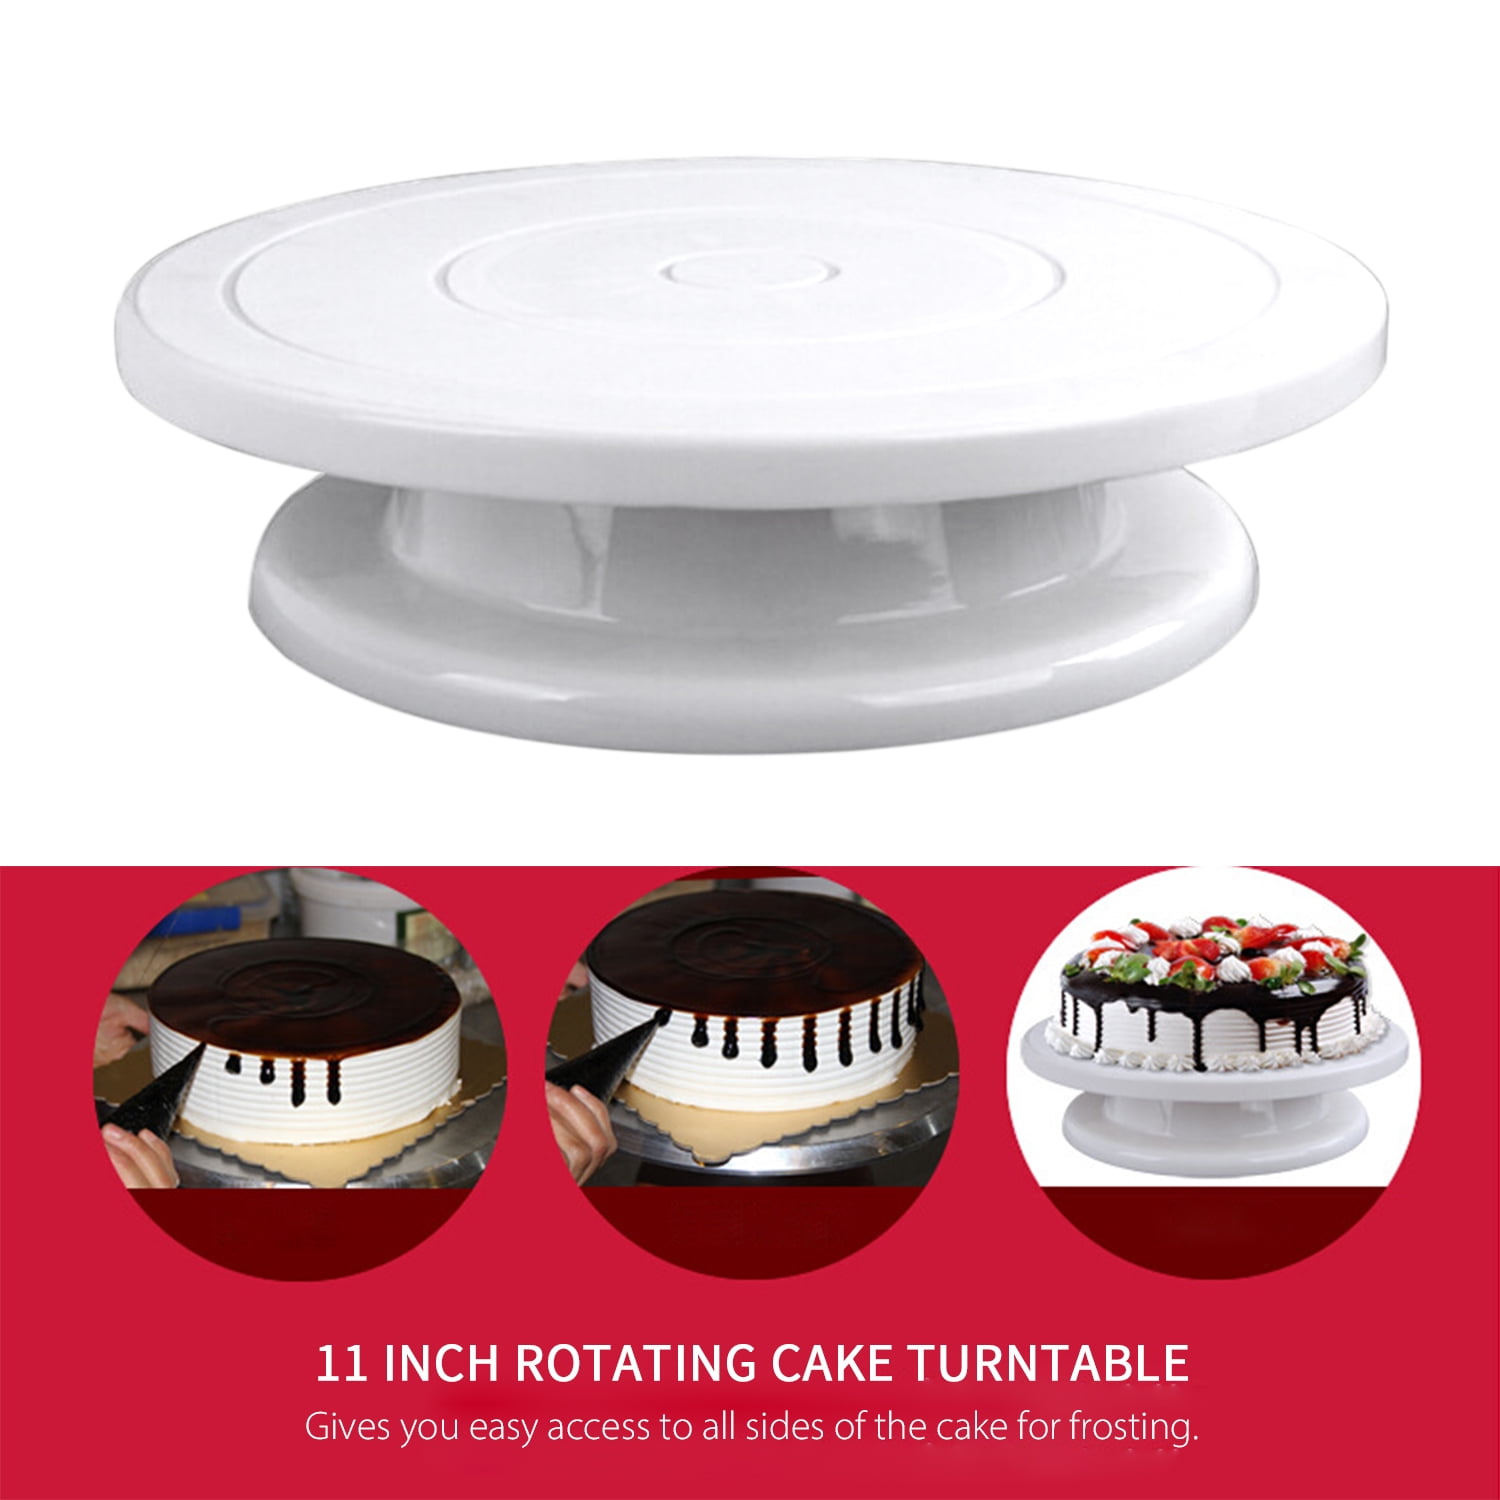 Details about  / 28CM ROTATING CAKE ICING DEOCRATING REVOLVING KITCHEN DISPLAY STAND TURNTABLE